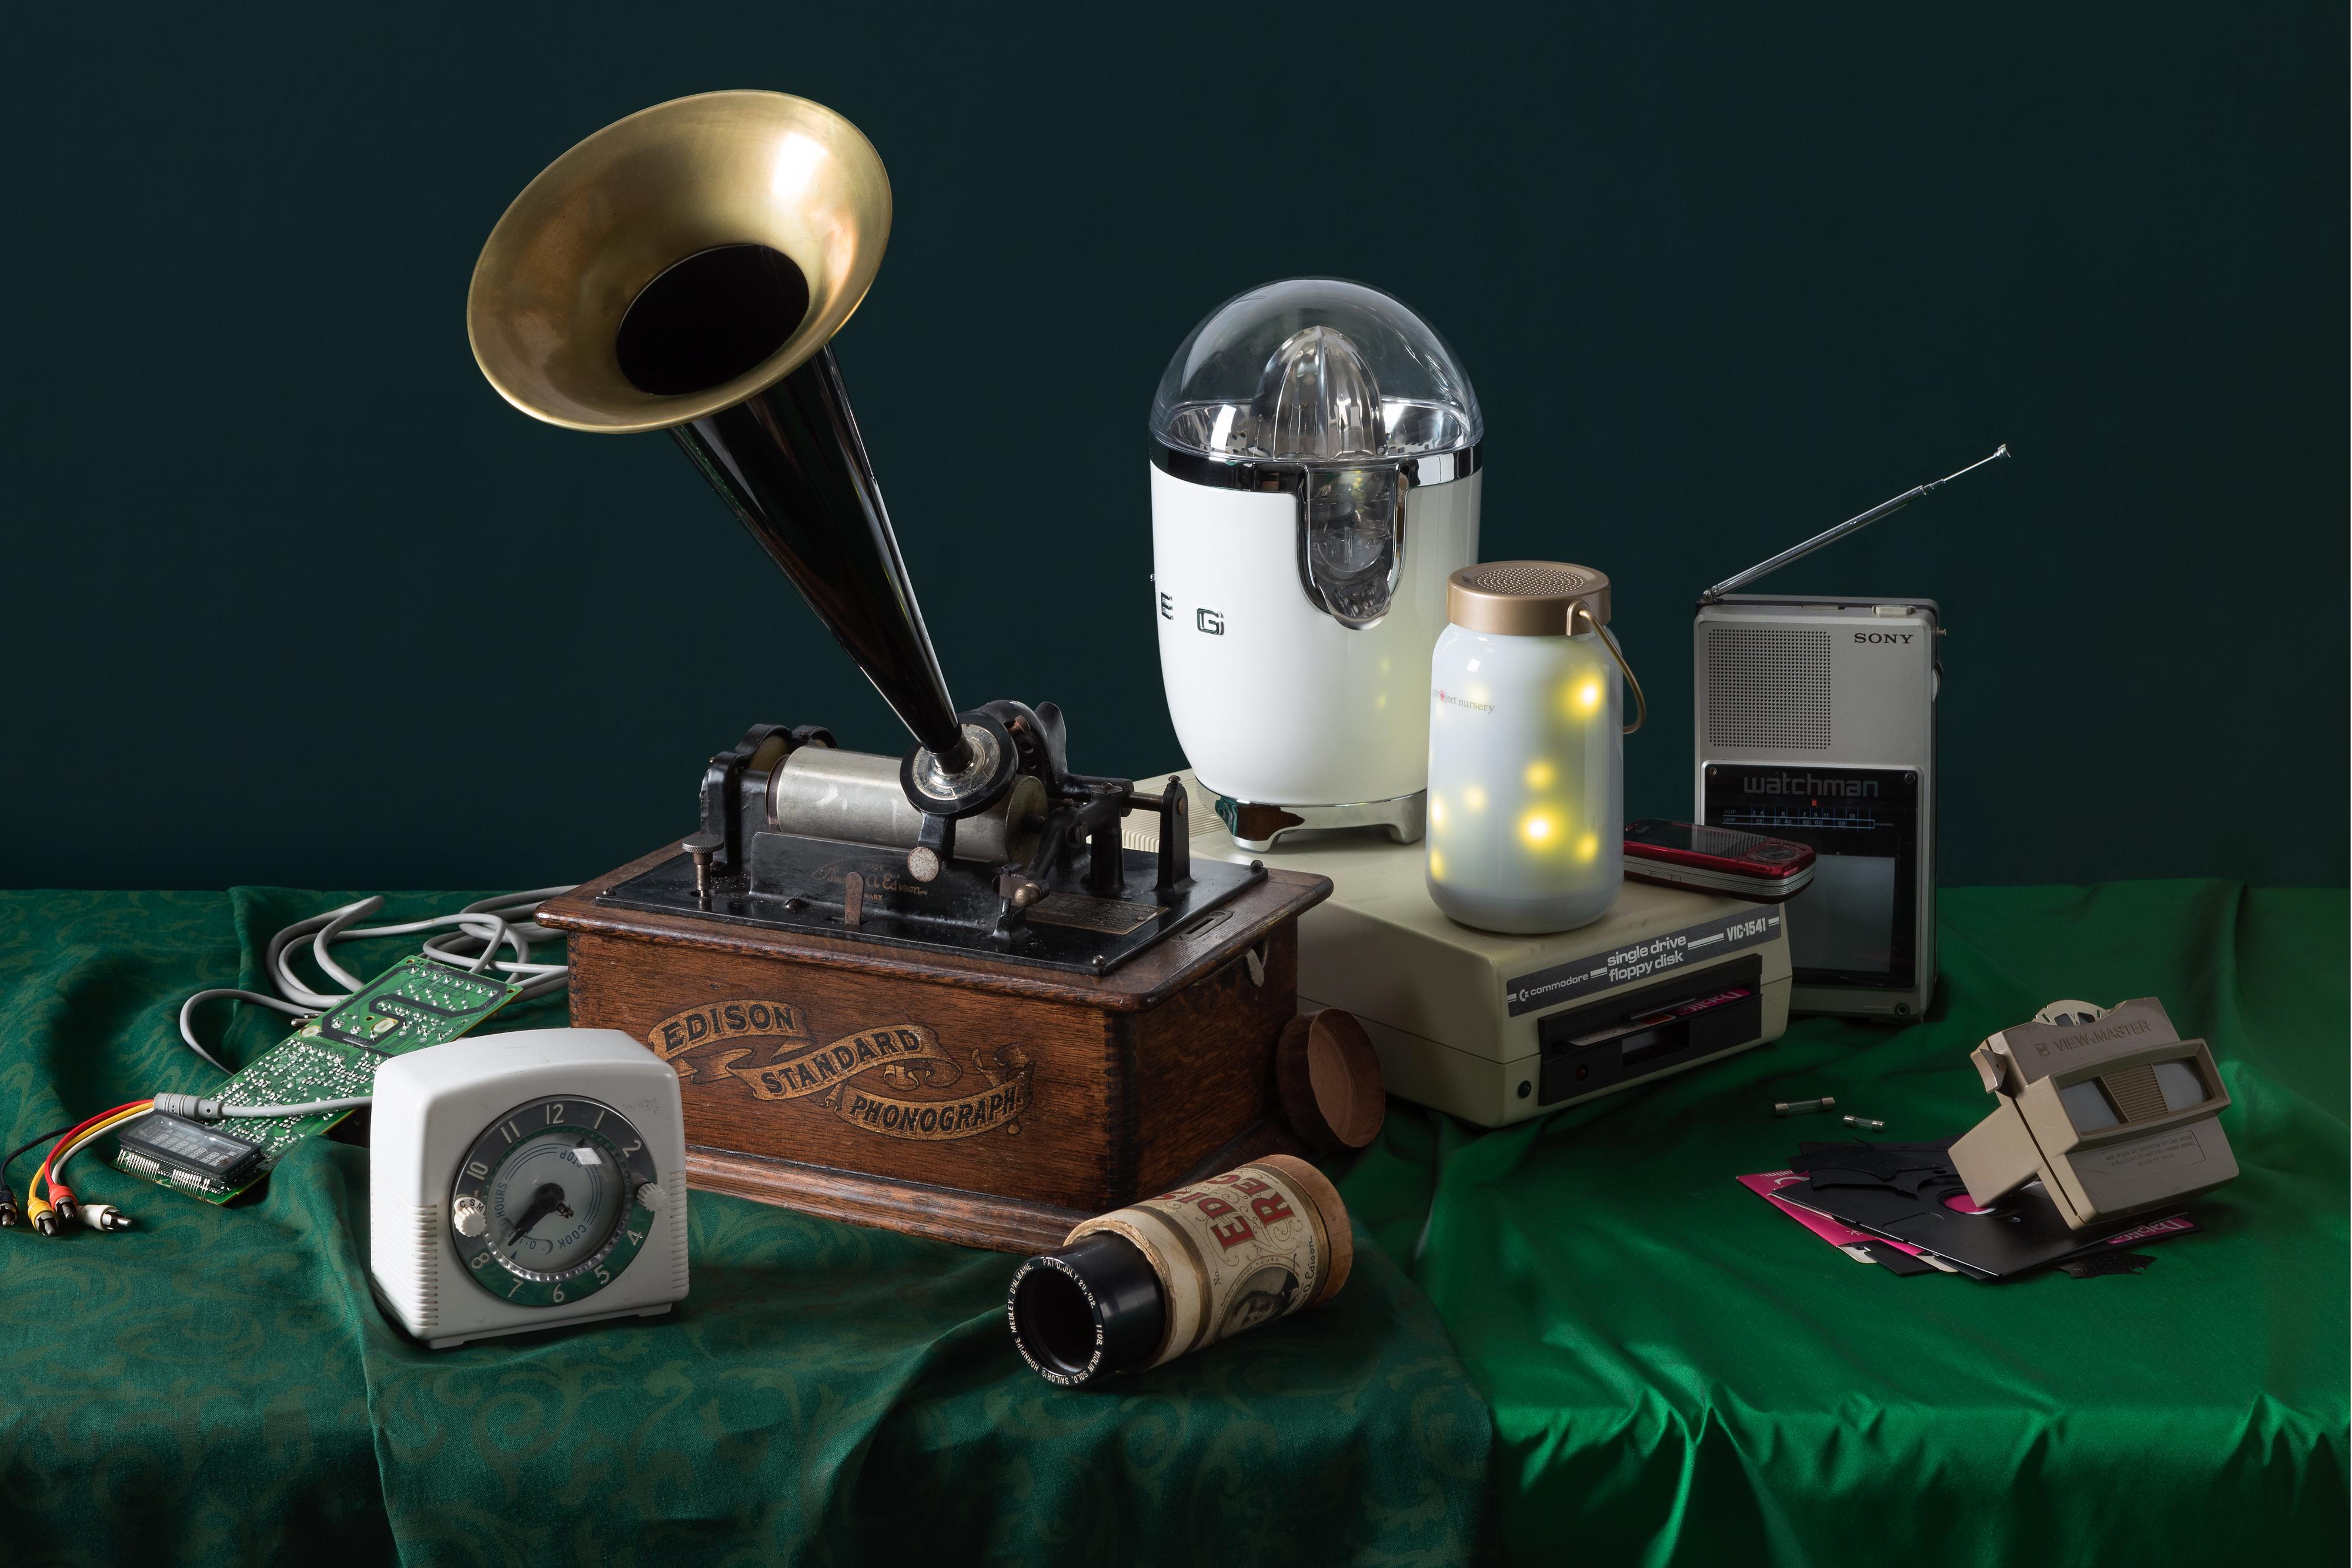 Jeanette May Still-Life Photograph - "Tech Vanitas: Electric Fireflies" Contemporary Still-life Photo of Vintage Tech